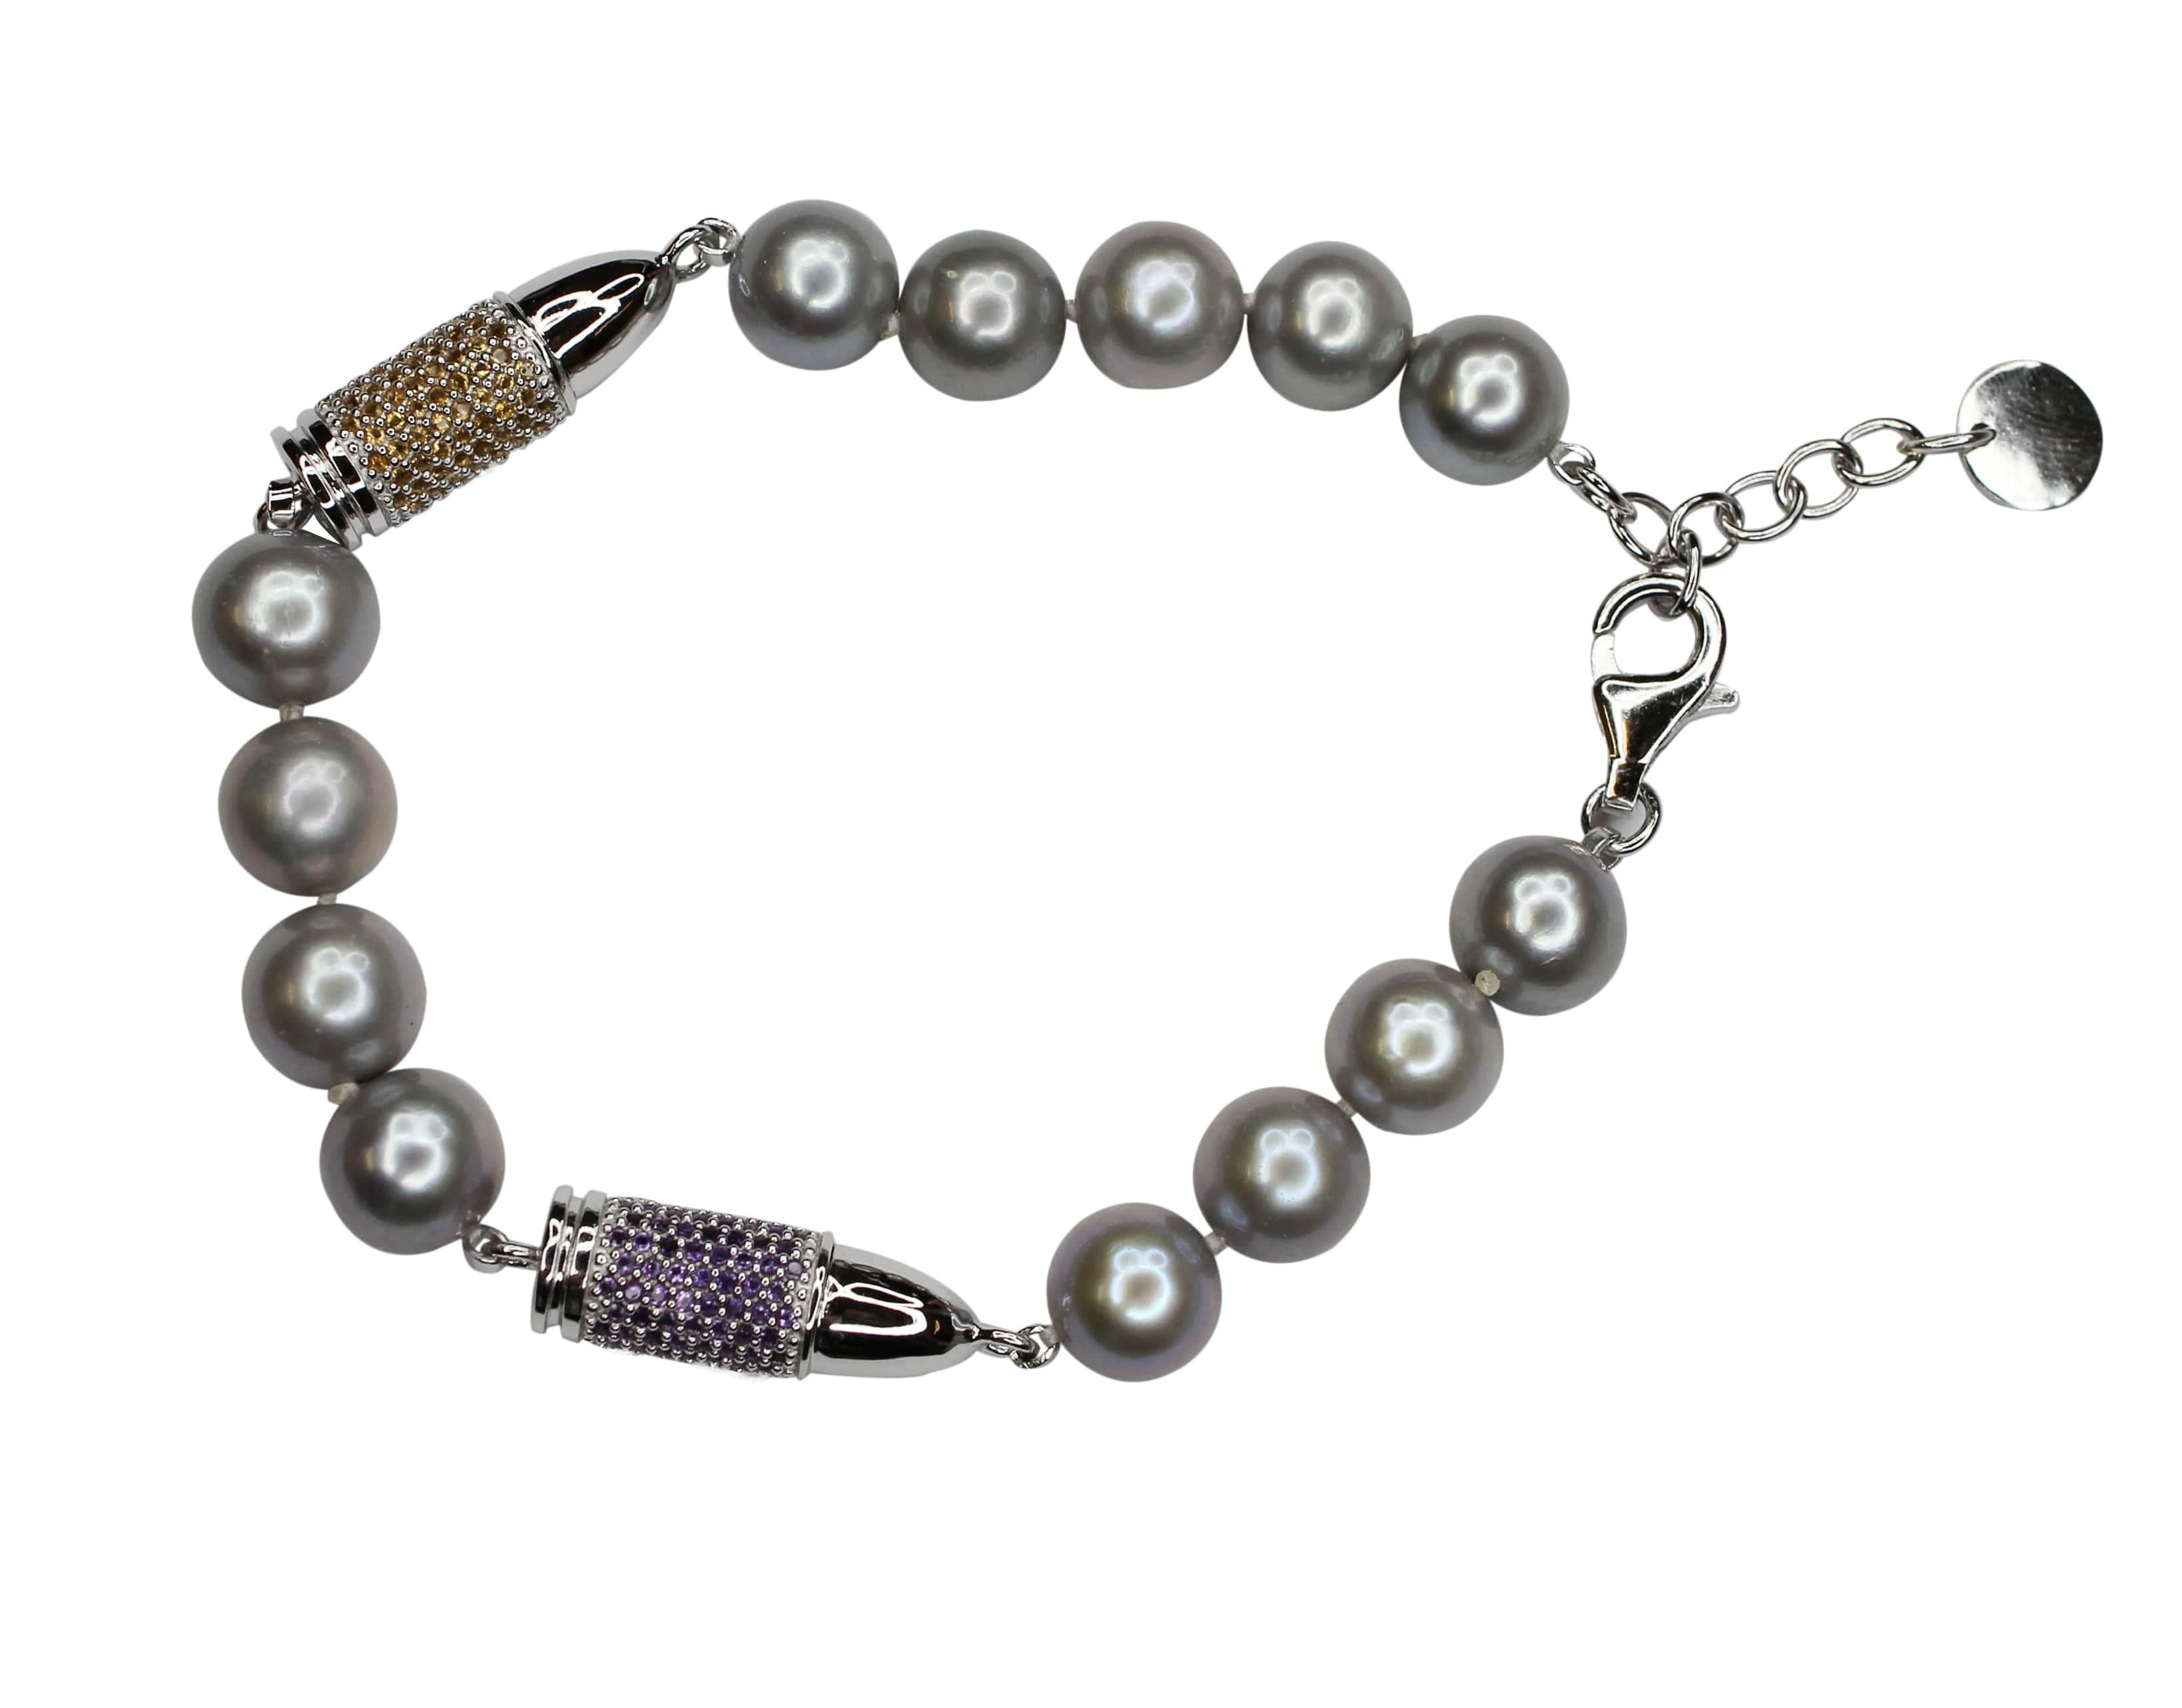 * Genuine Purple Amethyst & Citrines Gemstones 2.50 CTW
* Natural Silver Pearls
* 925 Sterling Silver & White Rhodium Plating
* 7 to 8.7 Inches Adjustable Clasp
* In-Stock & Ready to Ship